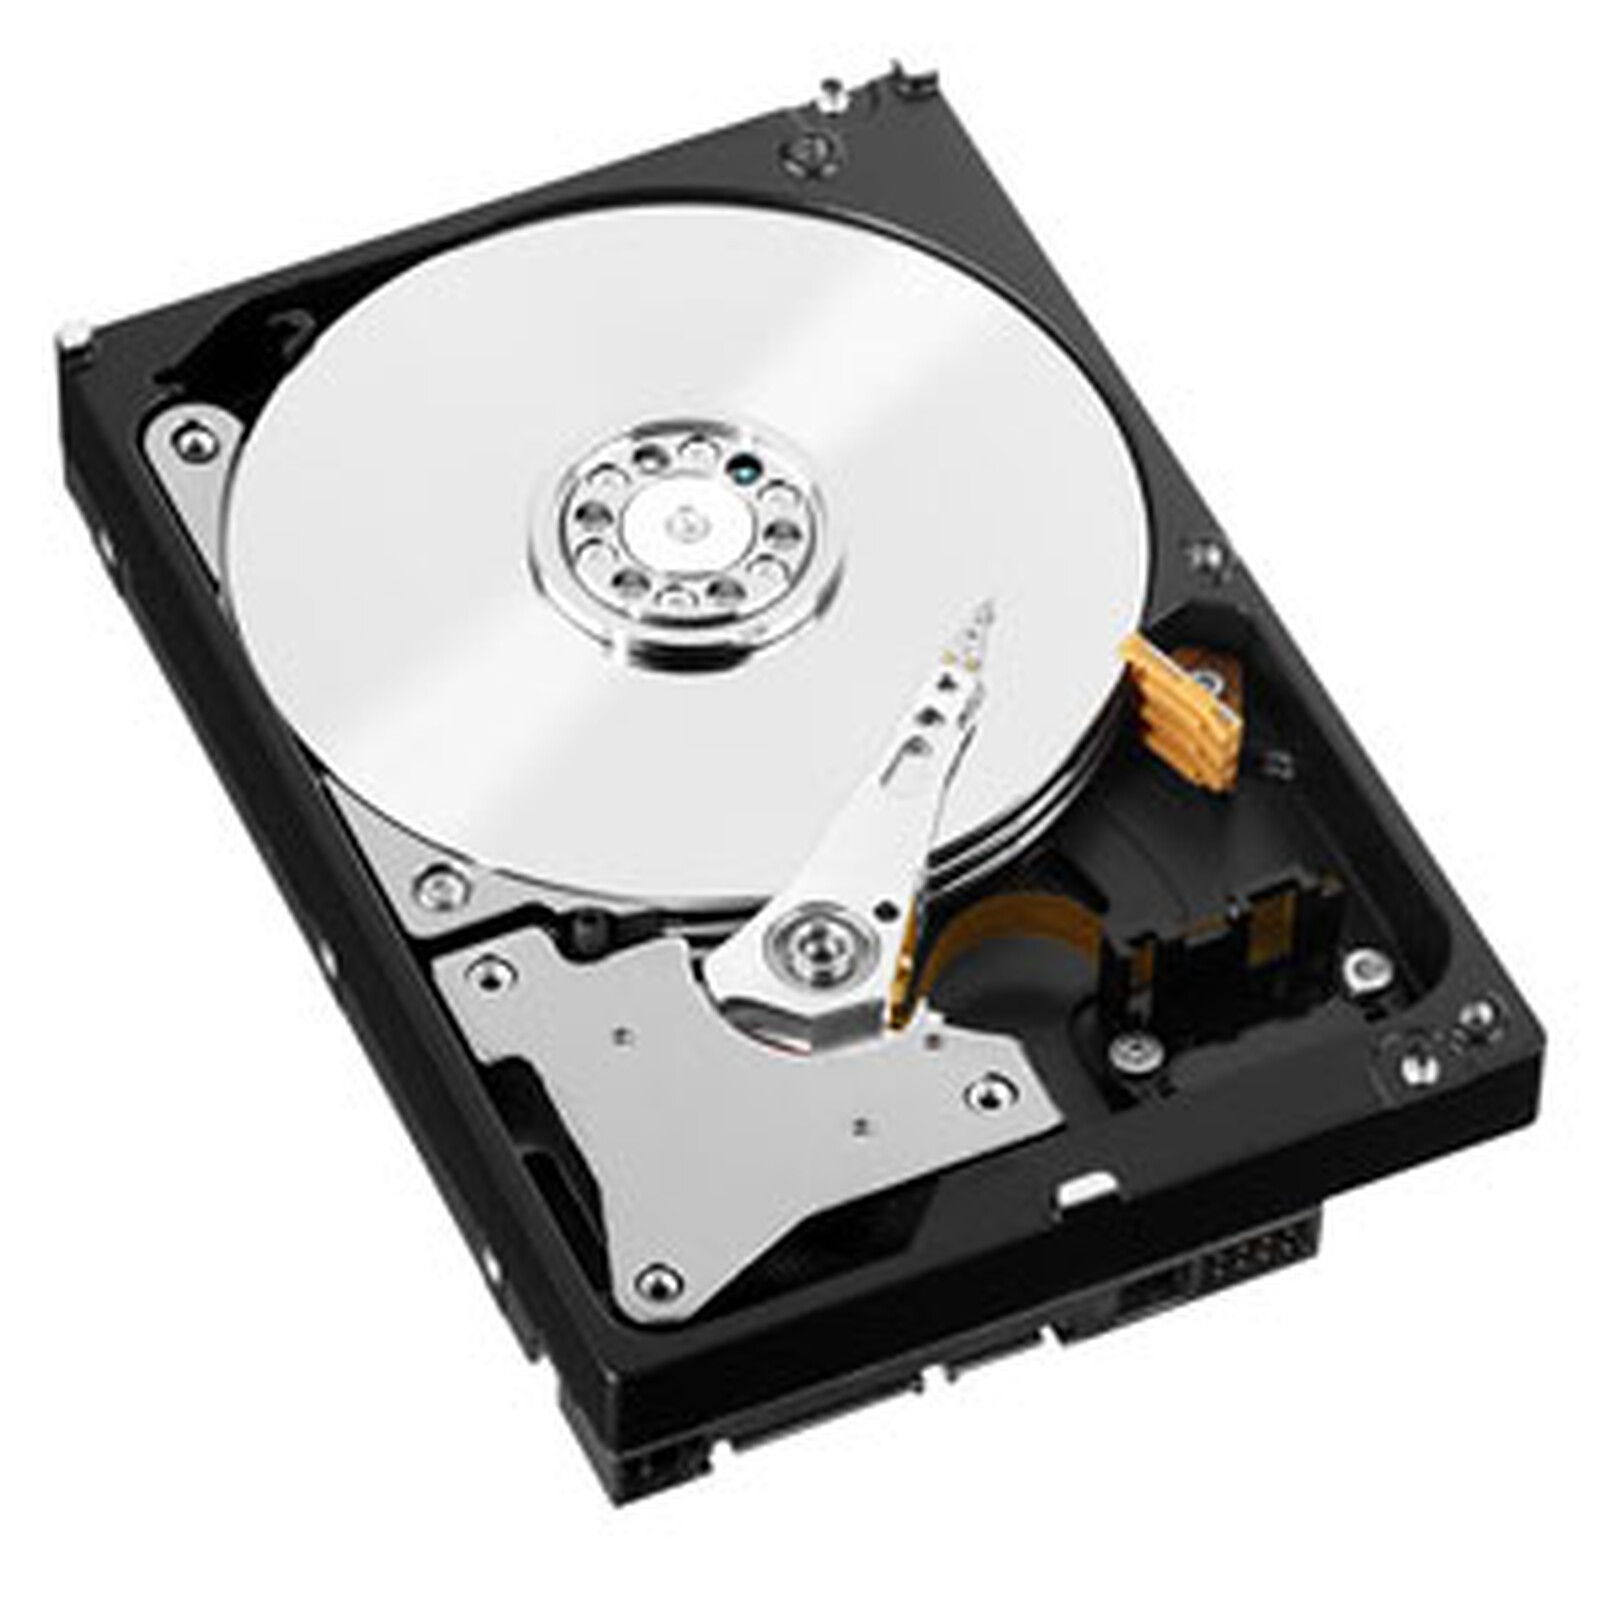 Western Digital WD Red Plus 10 To - Disque dur interne - LDLC